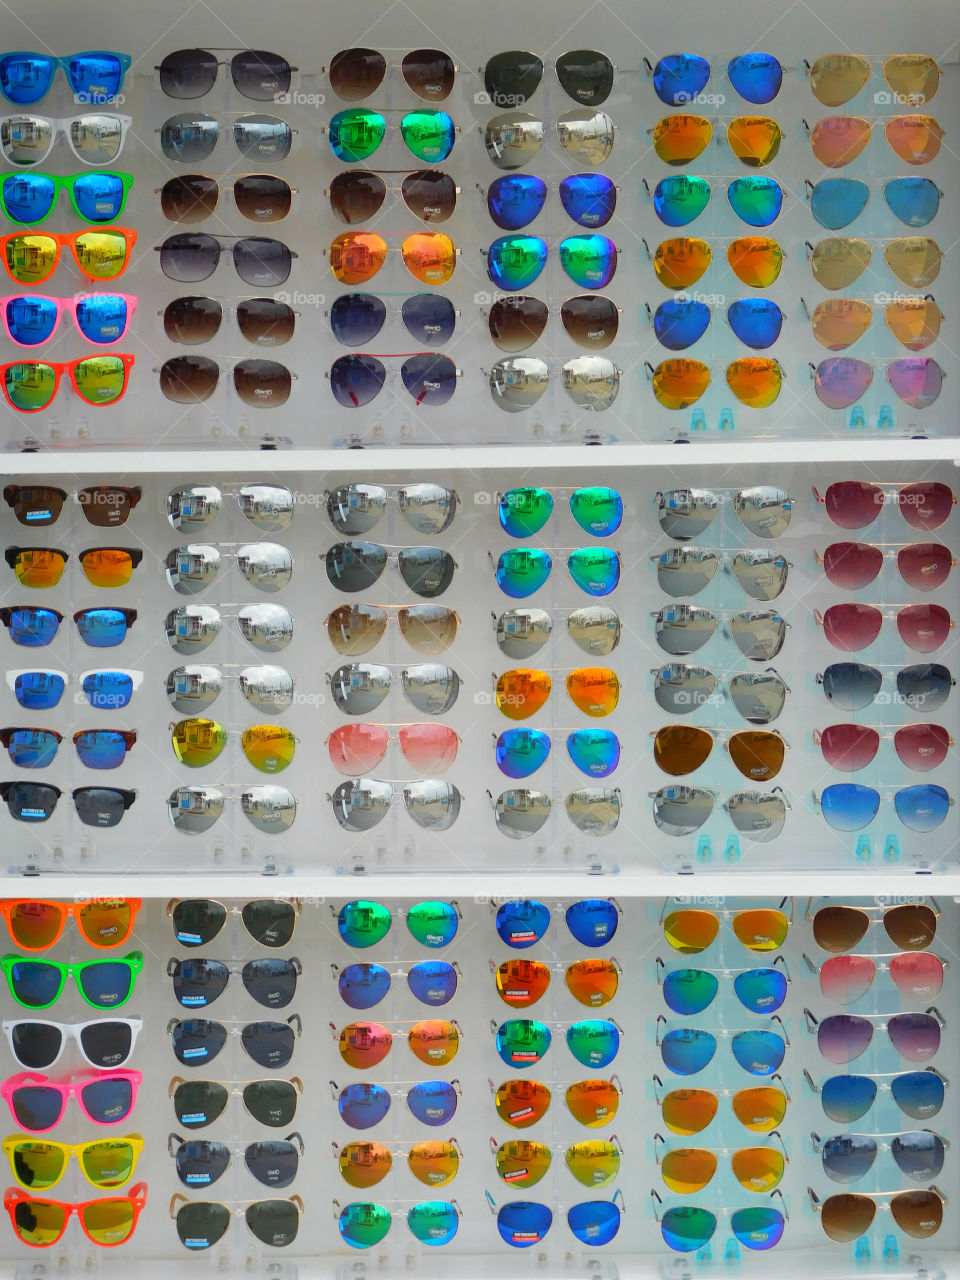 Shades for the eyes!
A color to match anyones eyes!